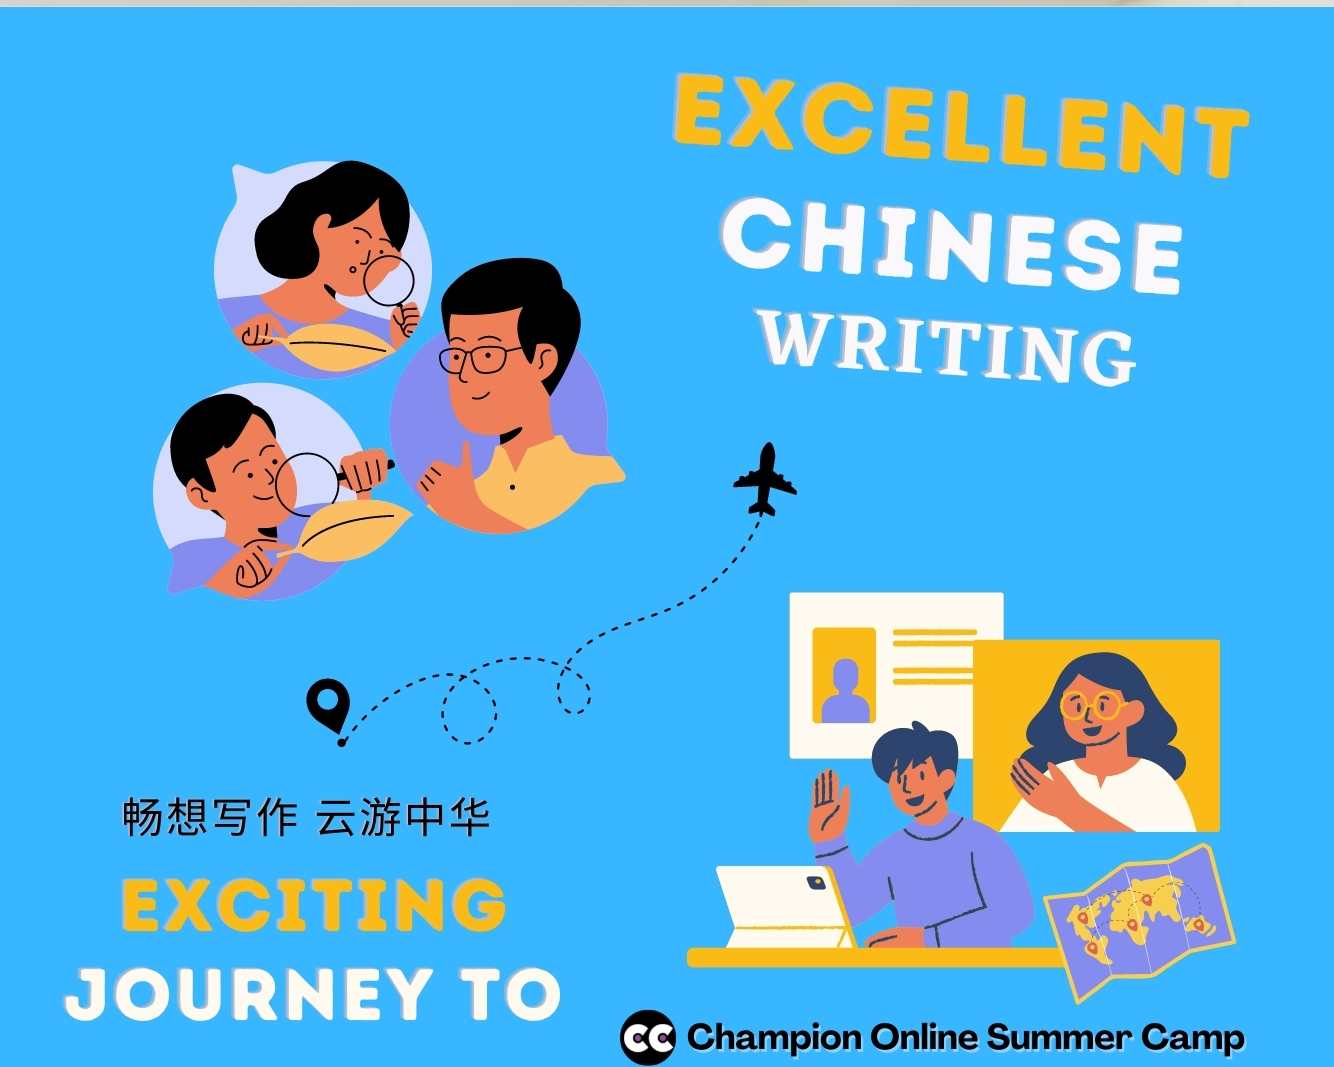 Exciting Journey to Excellent Writing: Campus Life | G5+ *Mandarin Advanced